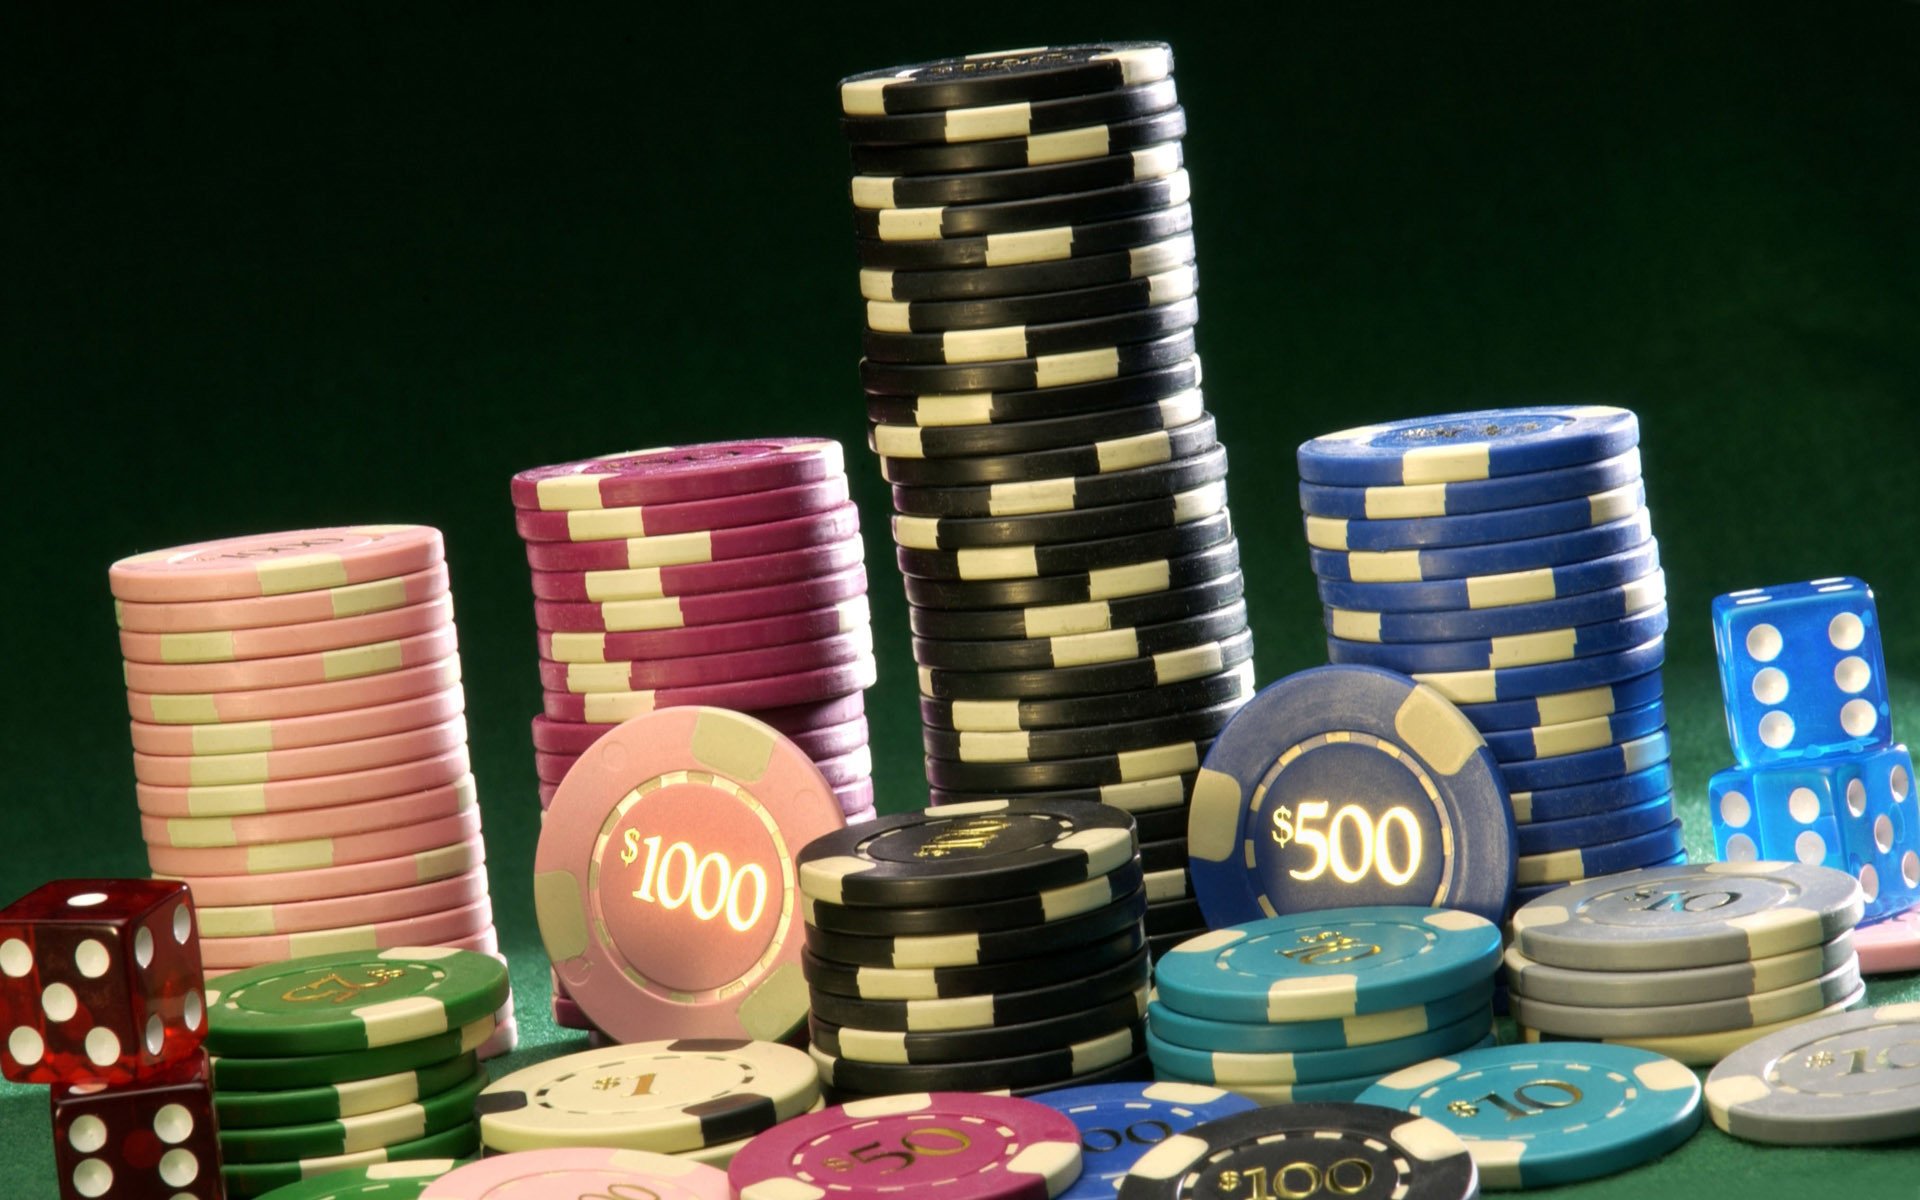 1920x1200 of Poker Chips Wallpapers, Stack of Poker Chips Myspace Backgrounds .